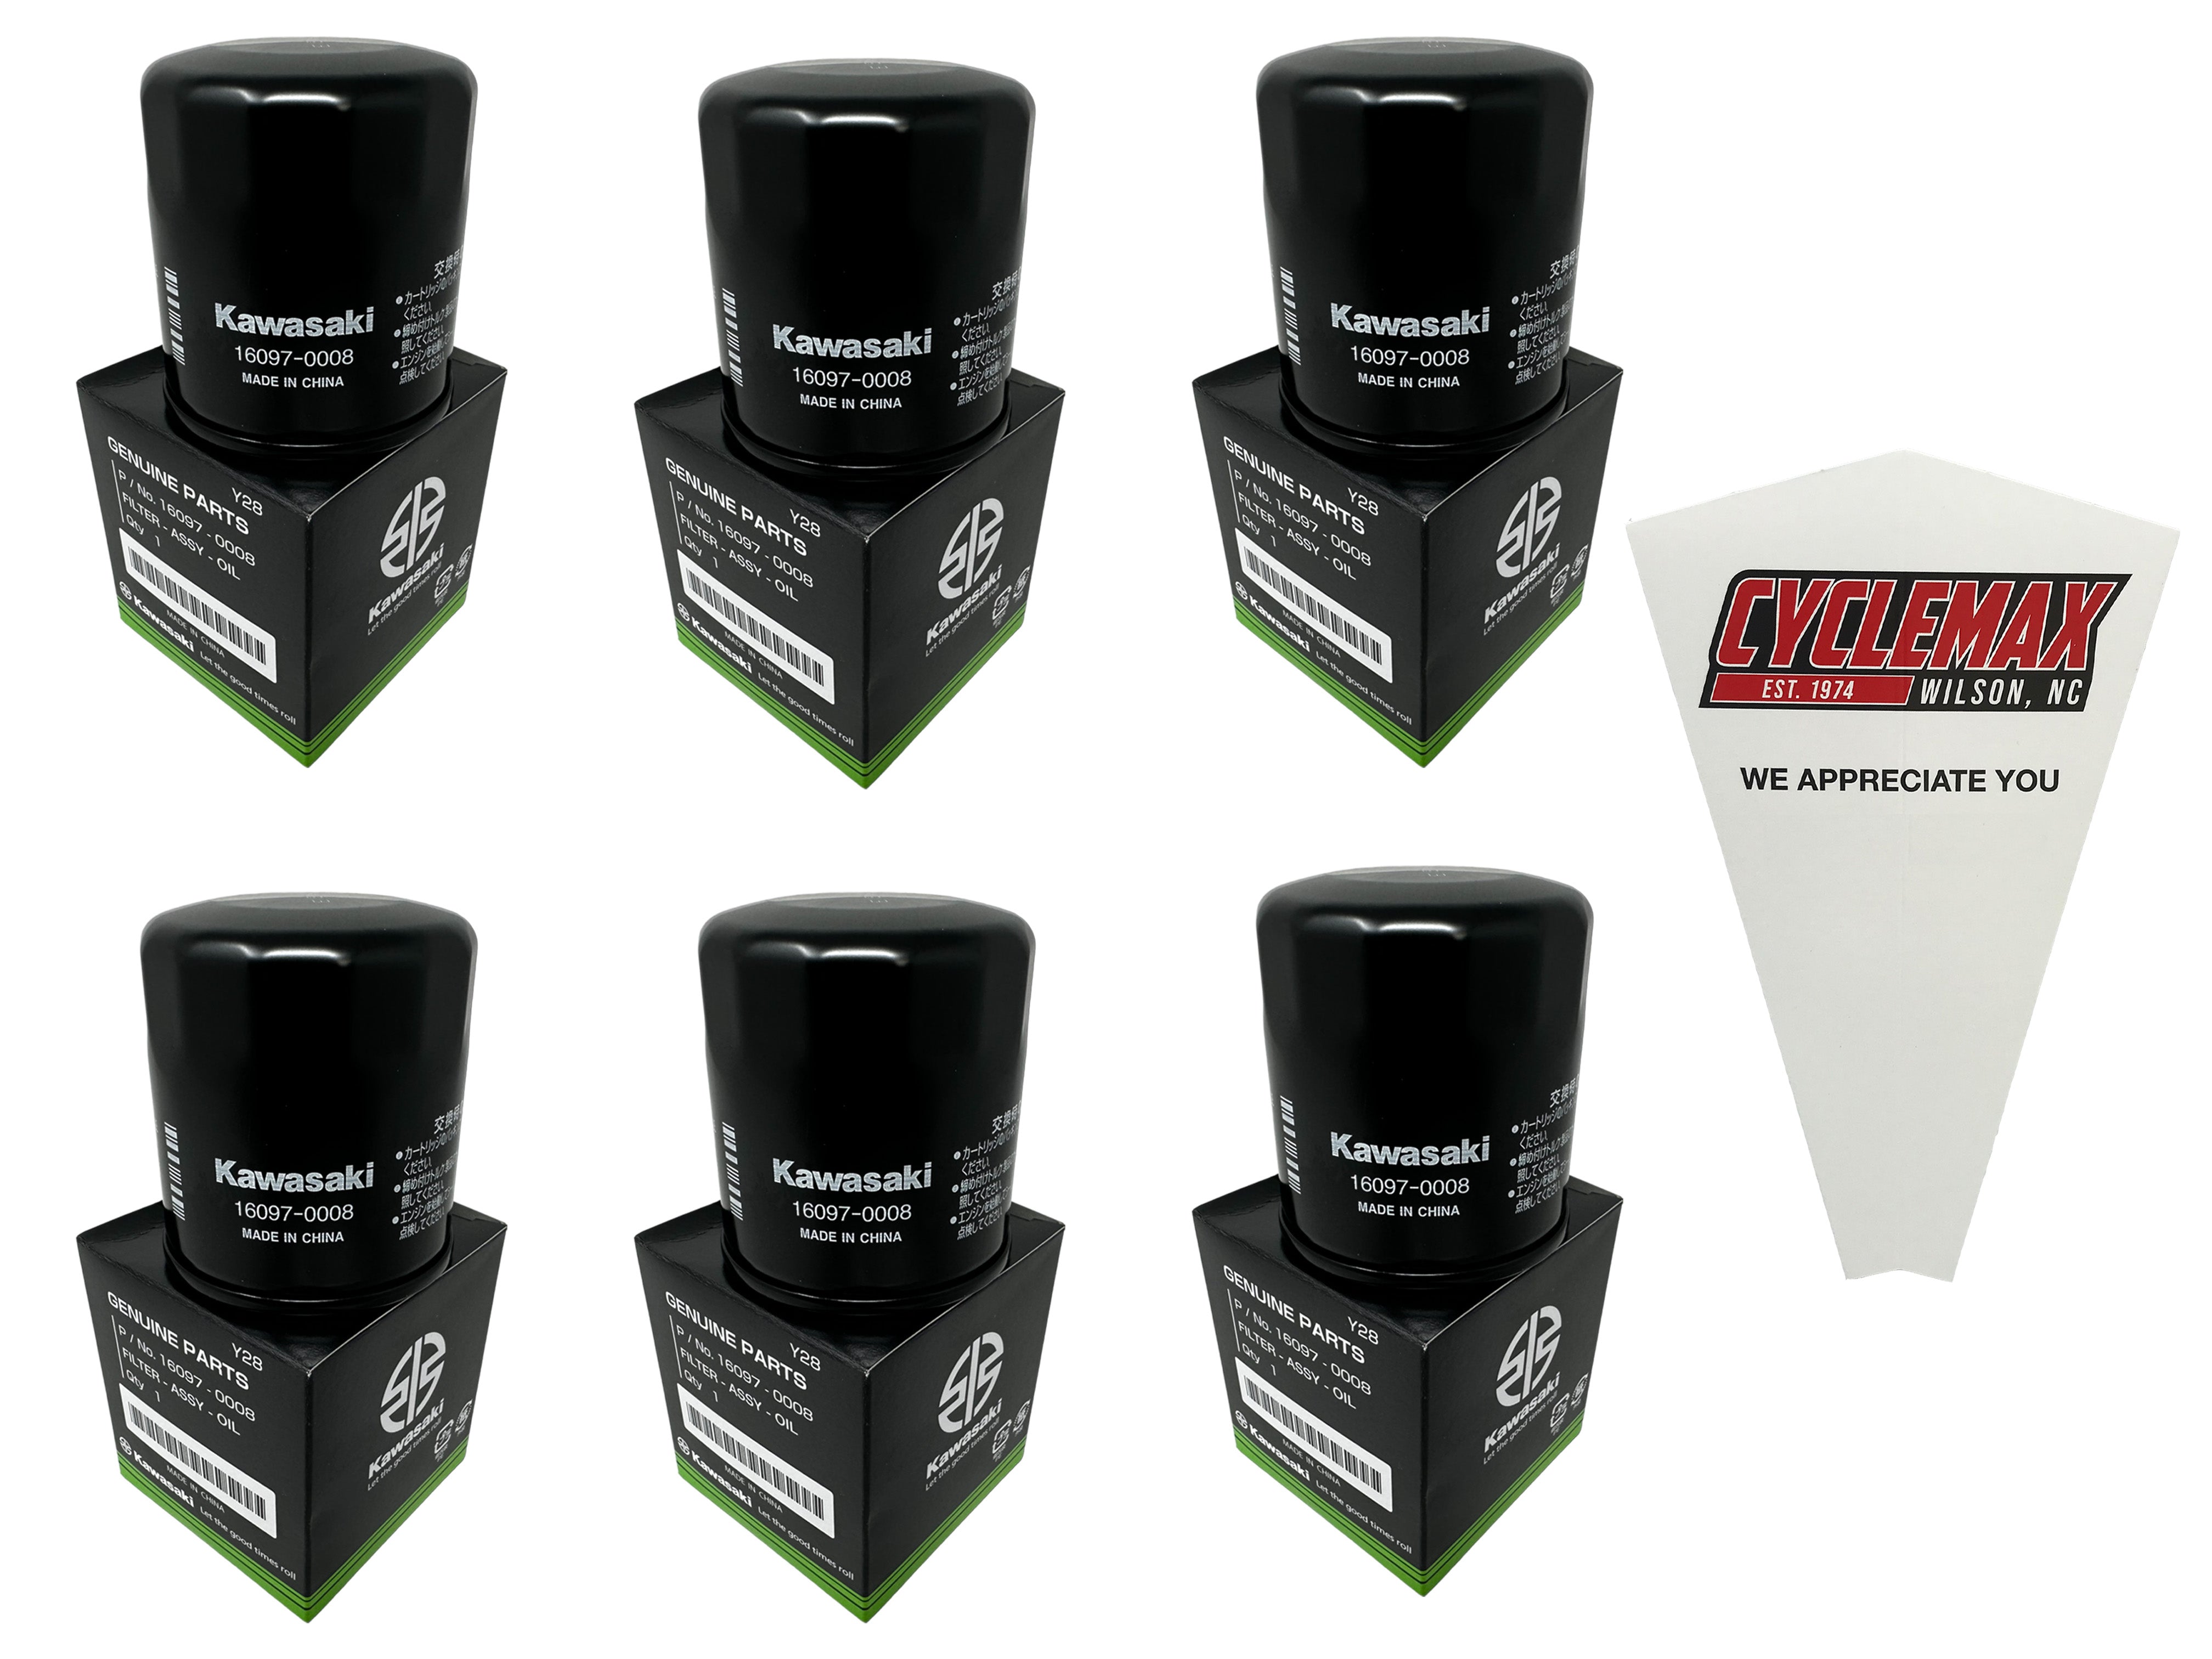 Cyclemax Six Pack for Kawasaki Oil Filter 16097-0008 Contains Six Filters and a Funnel